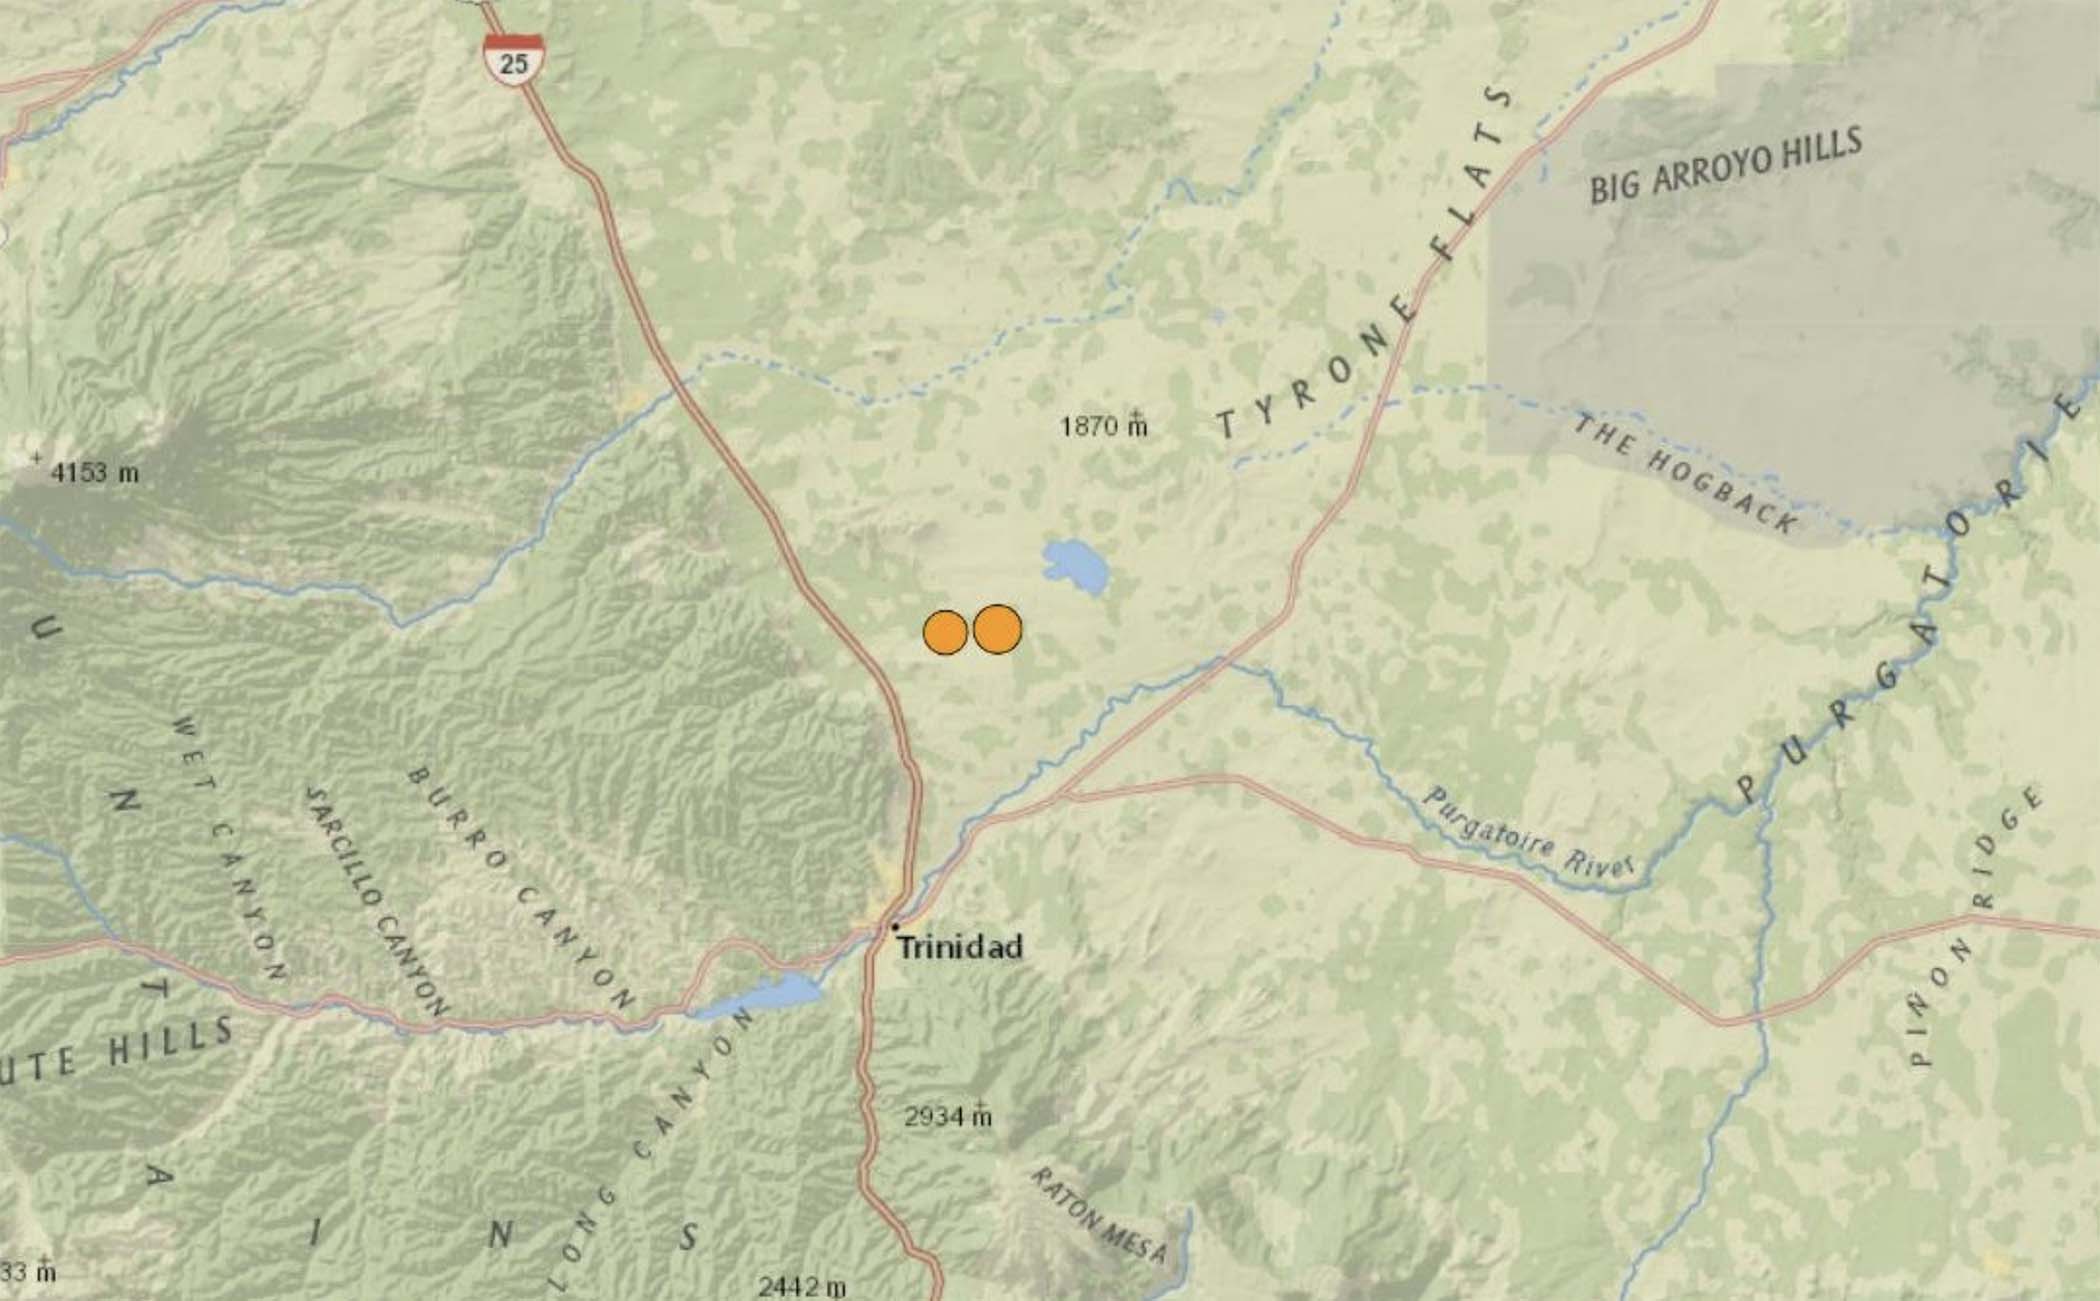 Trinidad was rocked with back-to-back earthquakes on June 19, centered west of Hoehne.  Photo courtesy USGS